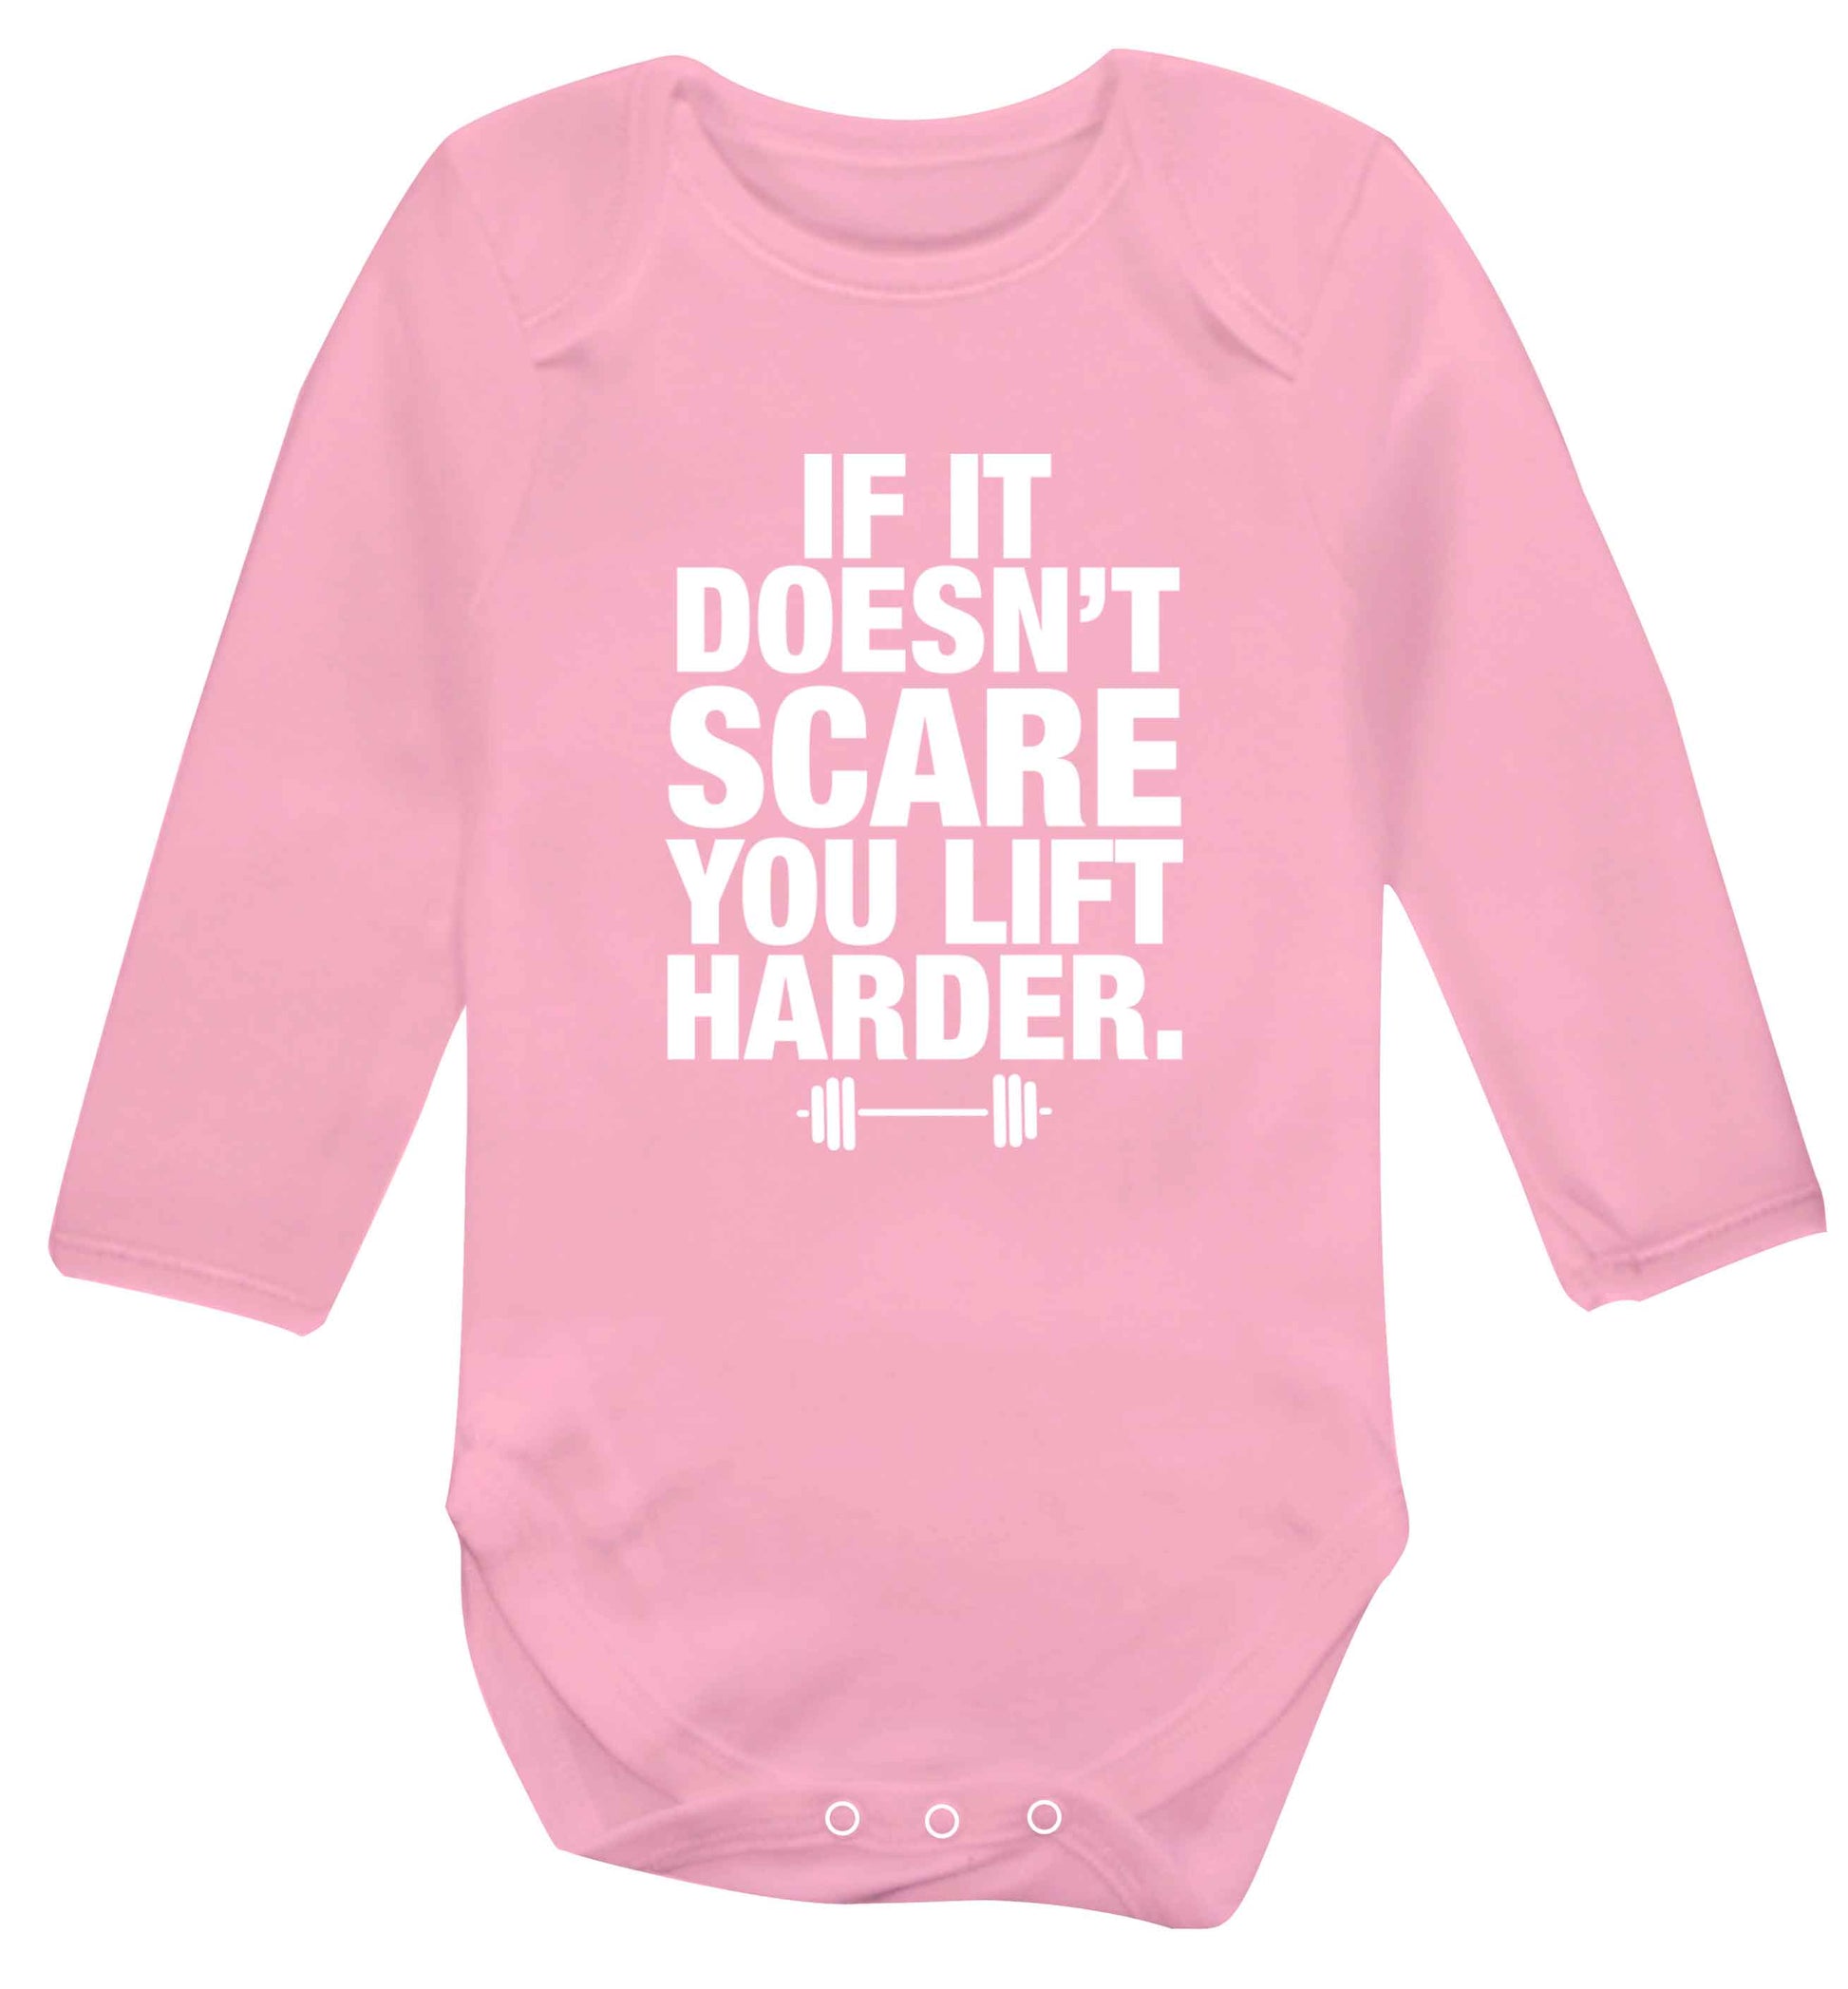 If it doesnt' scare you lift harder Baby Vest long sleeved pale pink 6-12 months